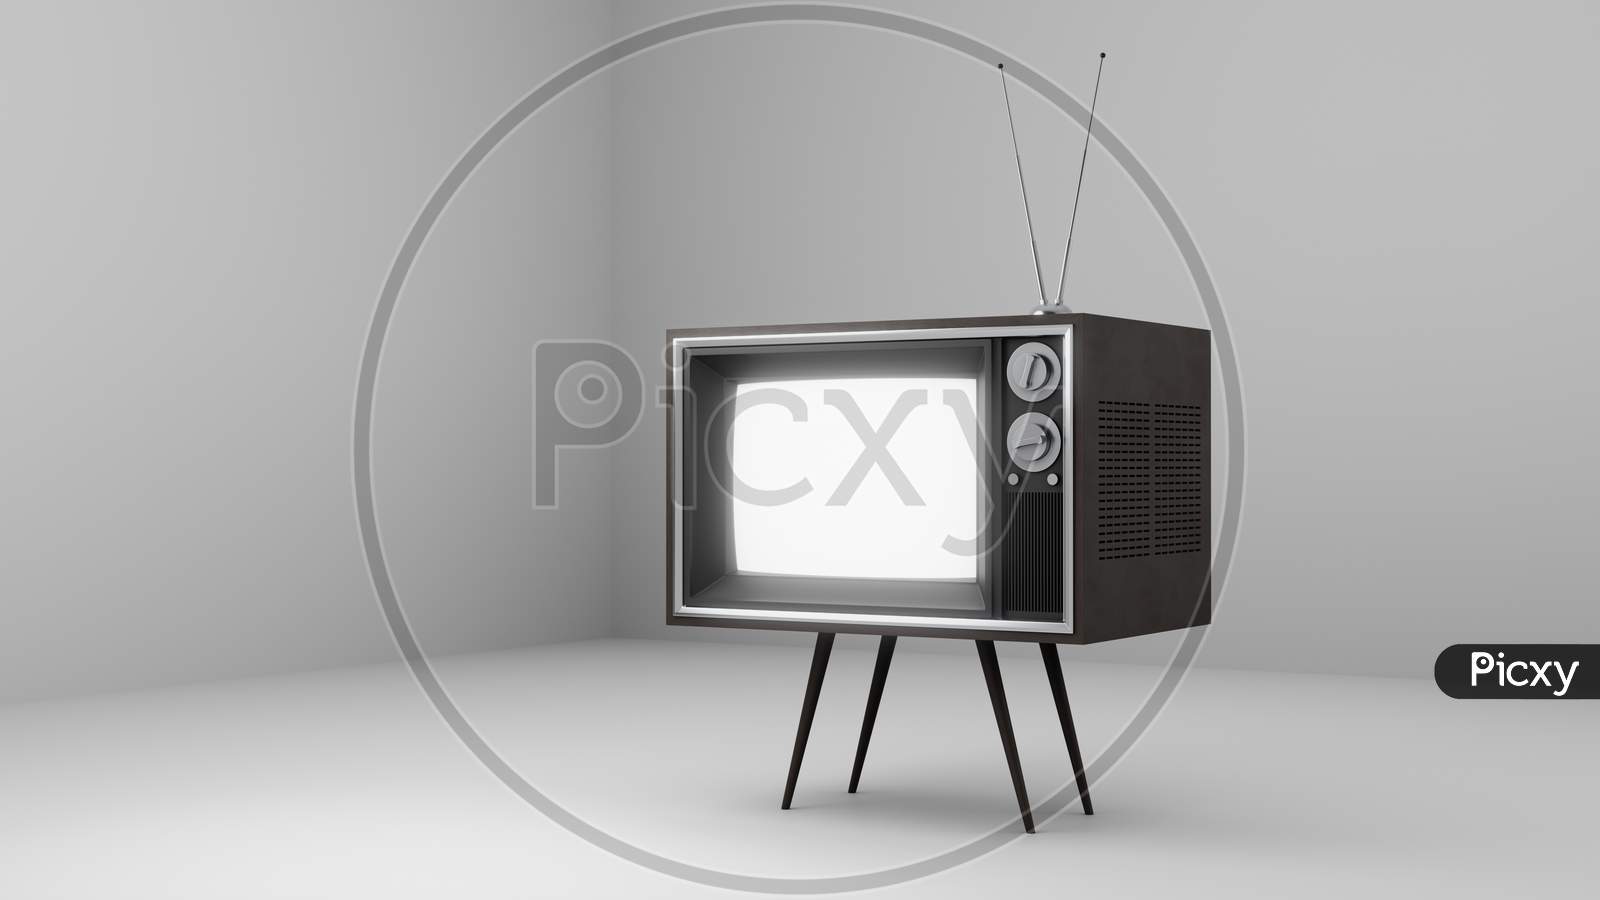 3D Rendering Of A Vintage Television Against A White Backdrop.